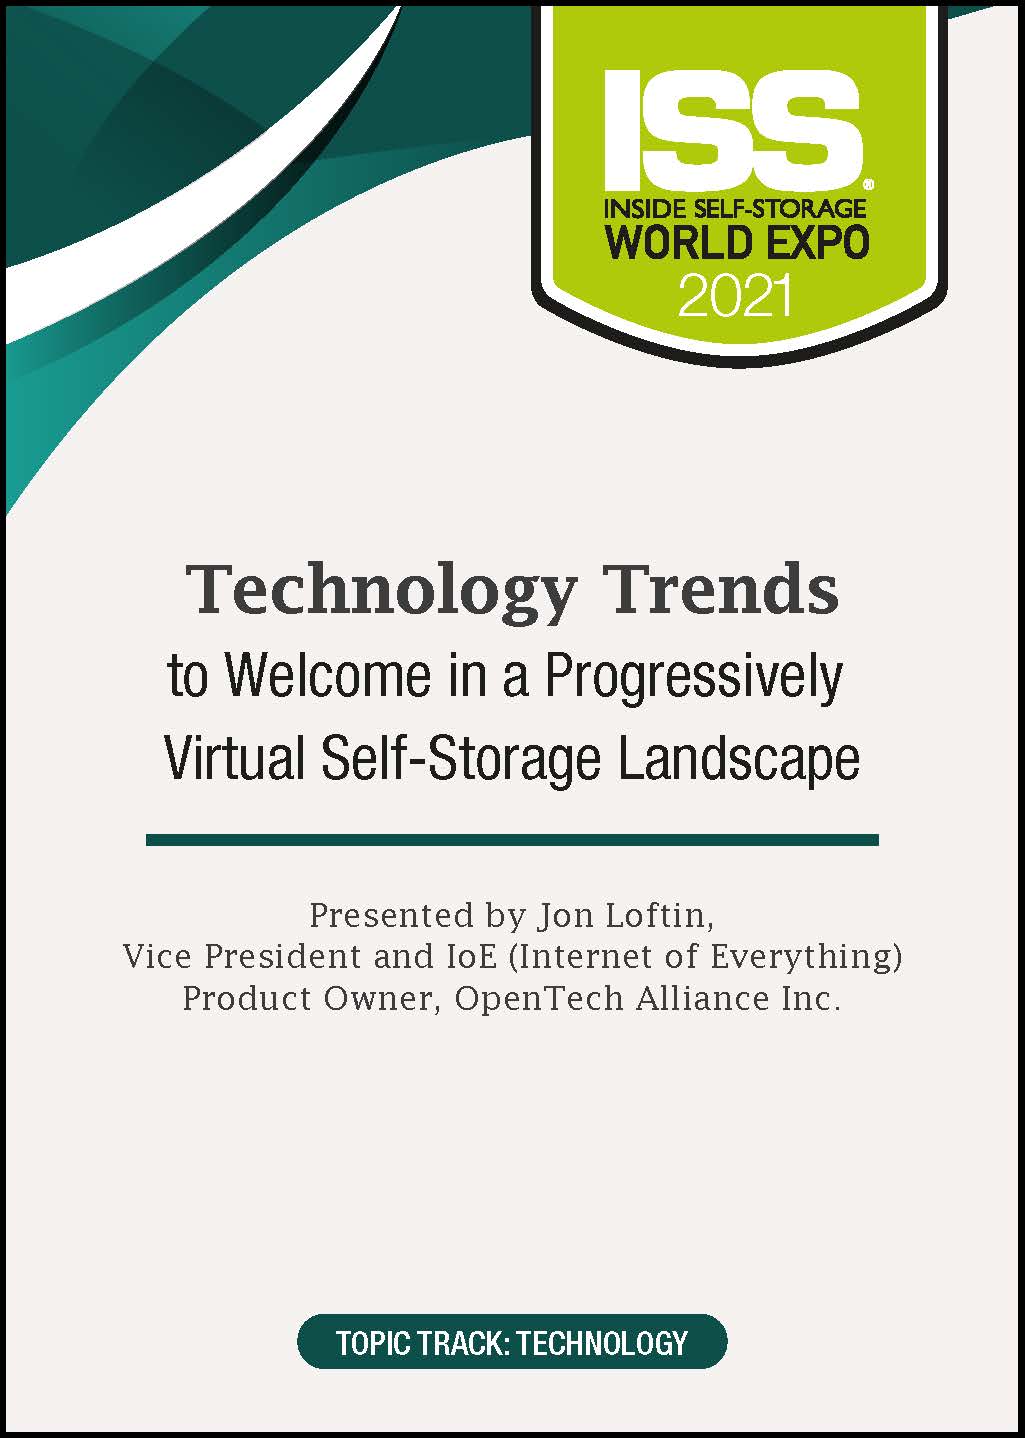 Technology Trends to Welcome in a Progressively Virtual Self-Storage Landscape